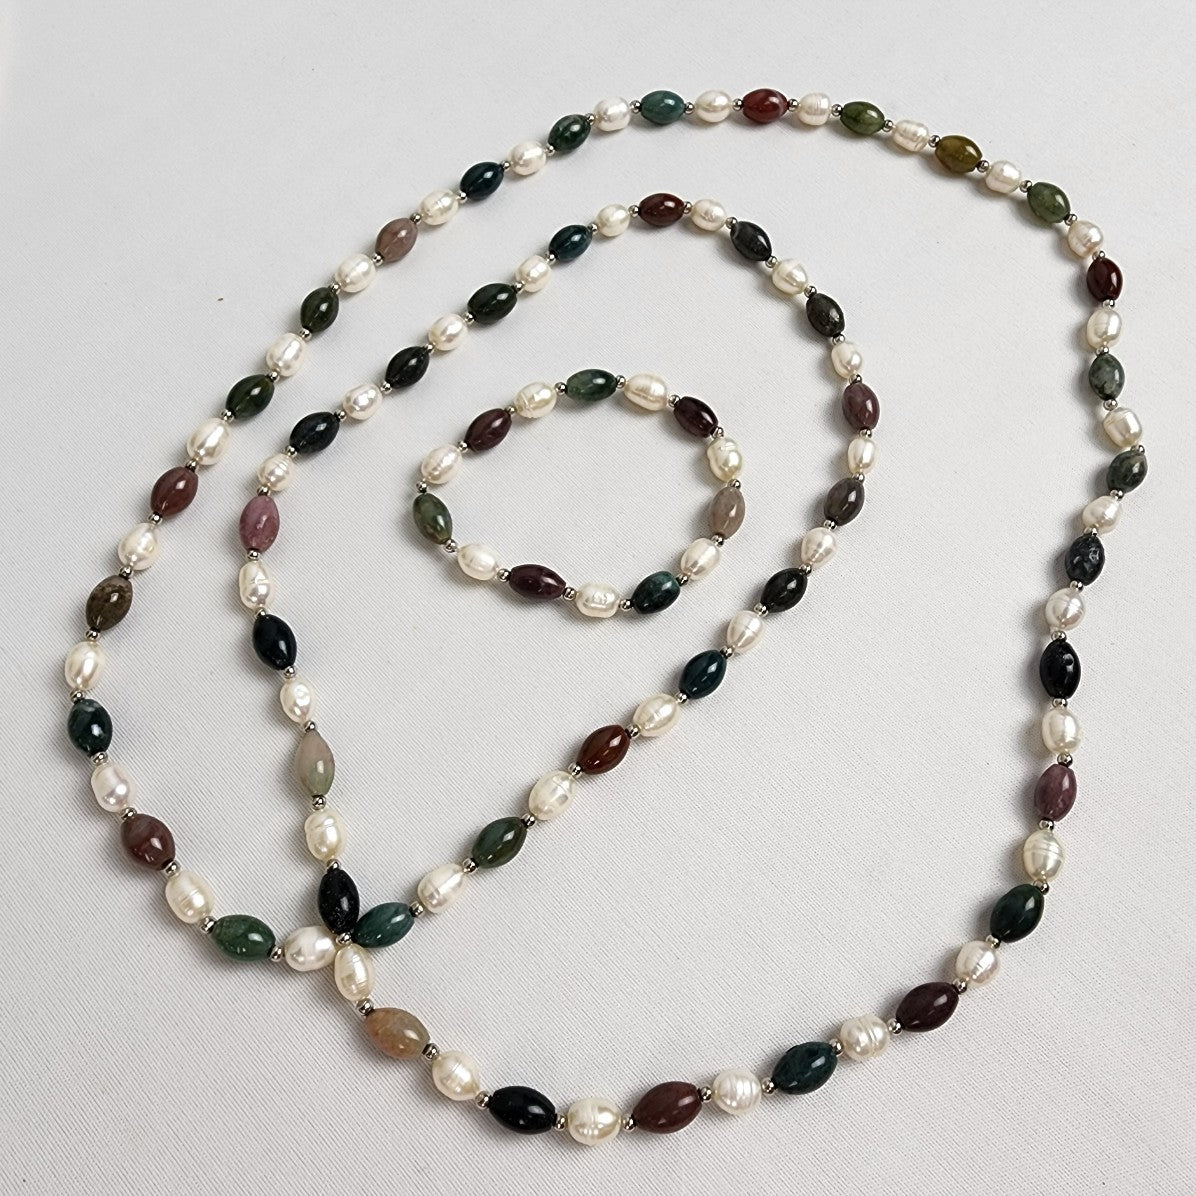 Faux Pearl Polished Natural Stone Beaded Necklace Bracelet Set